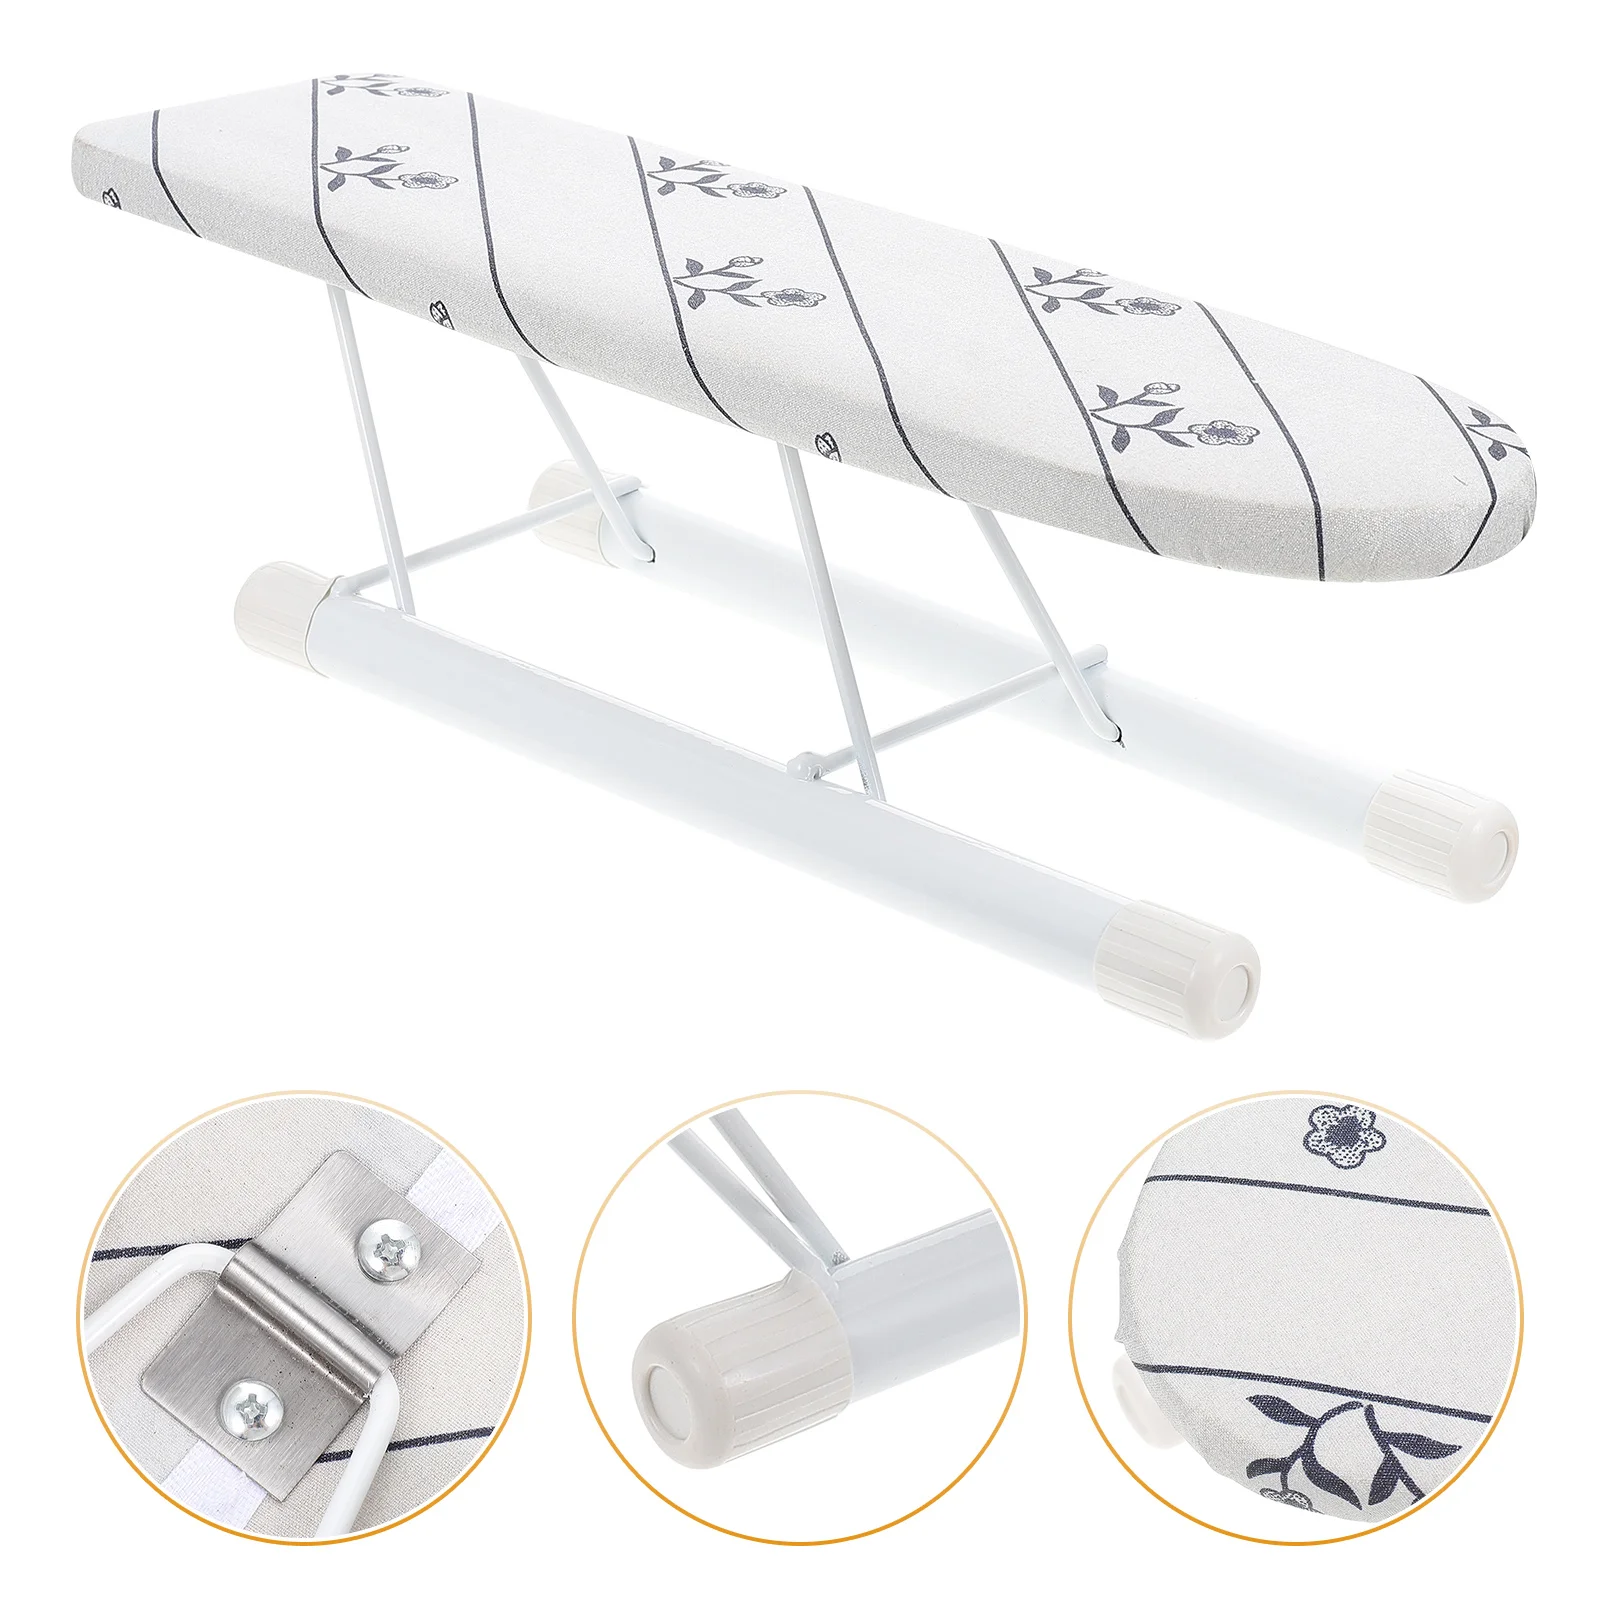 

Ironing Board Mini Tabletop Clothes Clothing Portable Platen Sleeve Household Rest Fabric Folding Boards Foldable Travel Tables